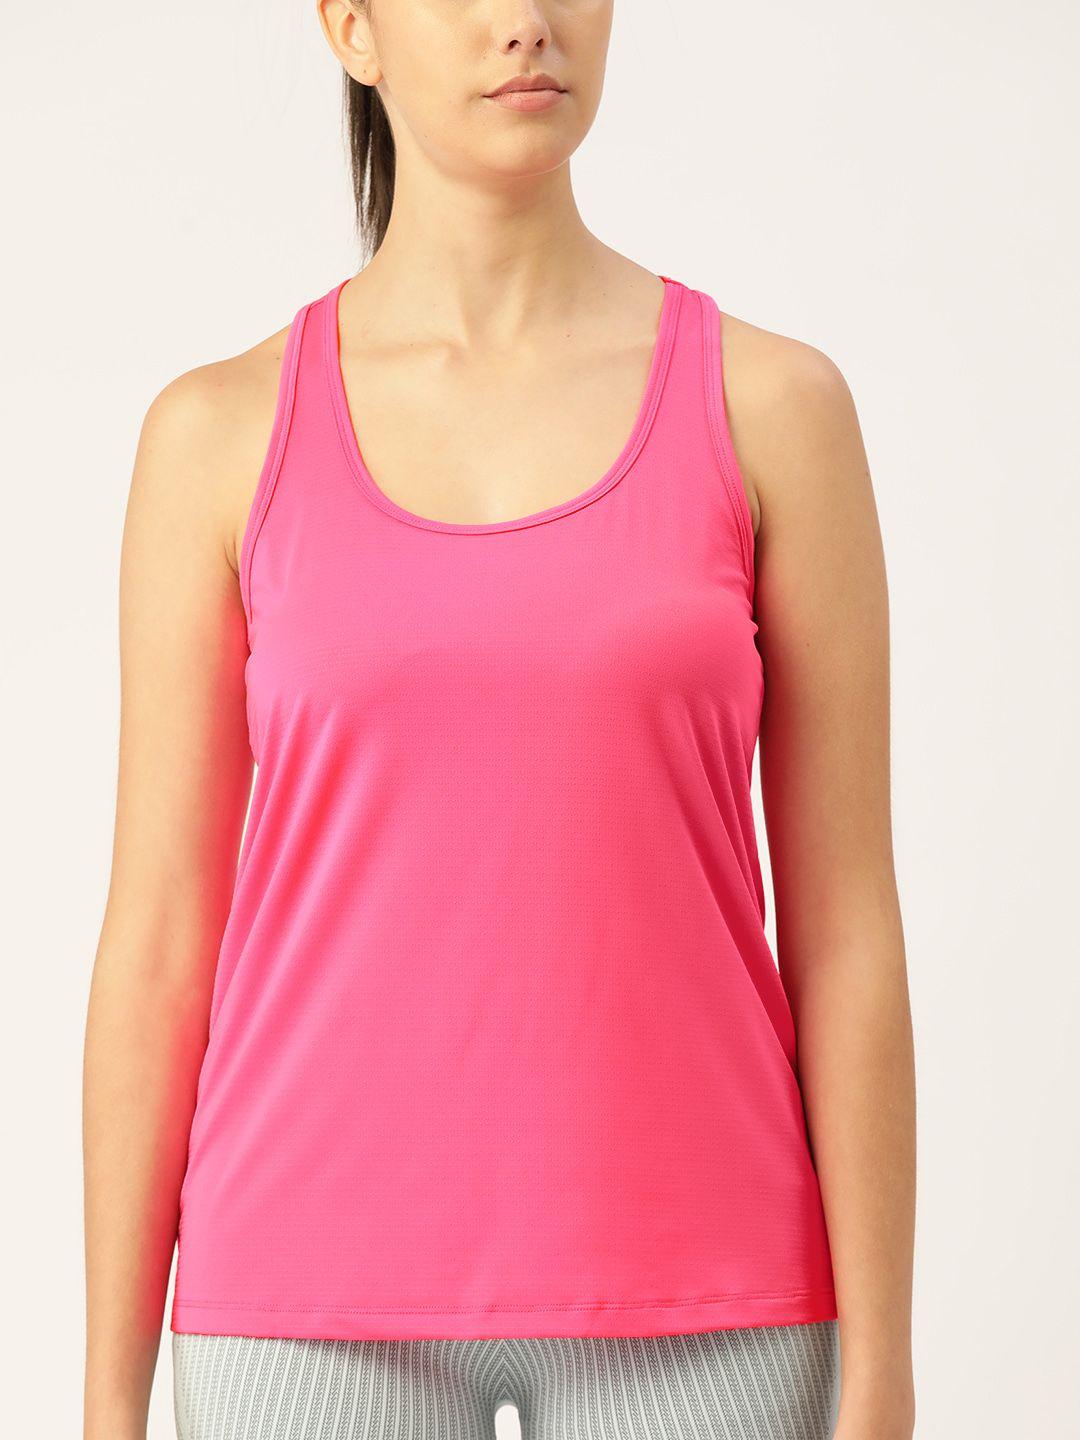 macy's ideology pink perforated tank top